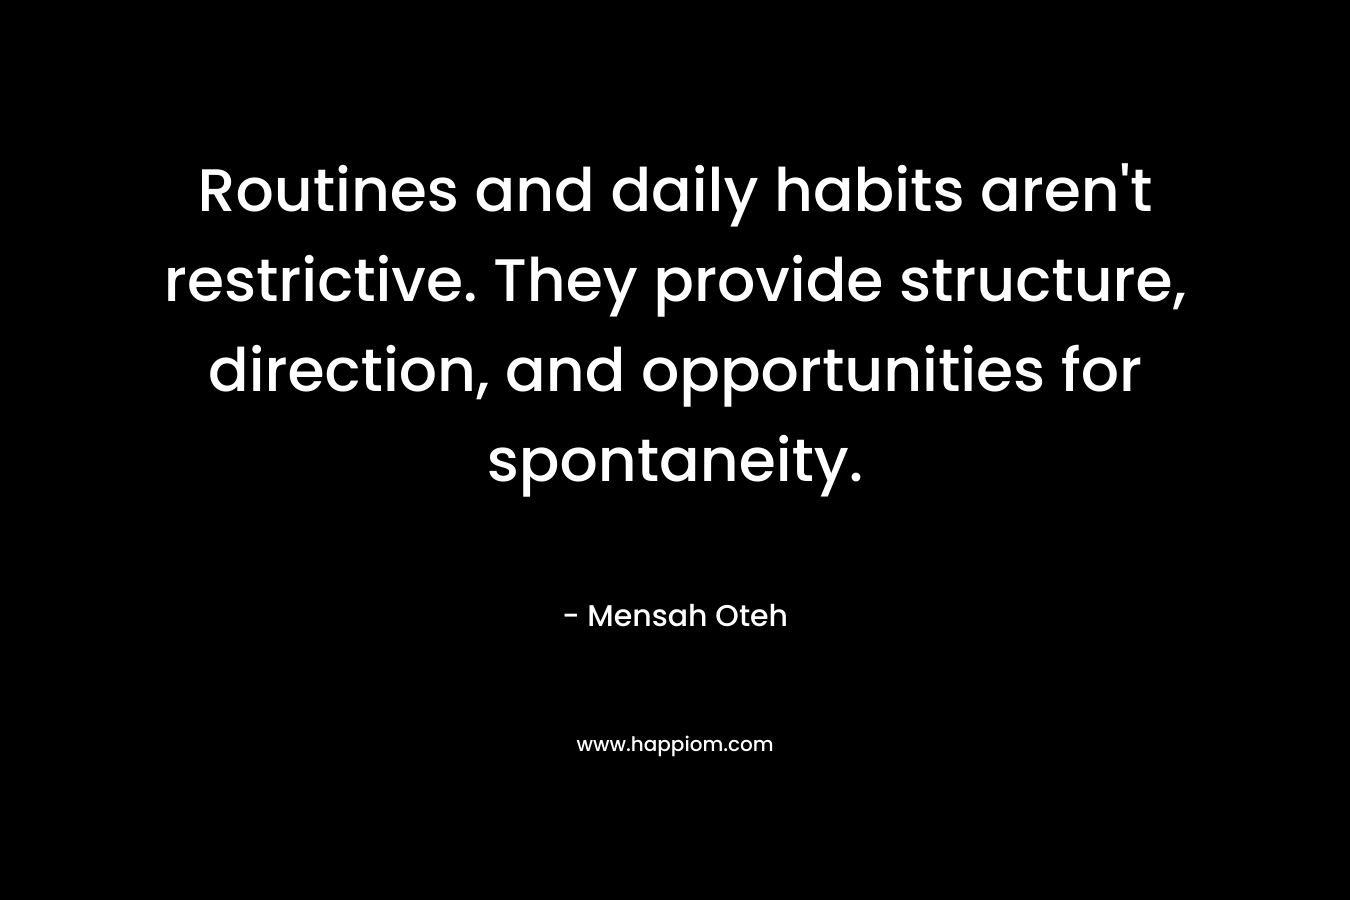 Routines and daily habits aren't restrictive. They provide structure, direction, and opportunities for spontaneity.